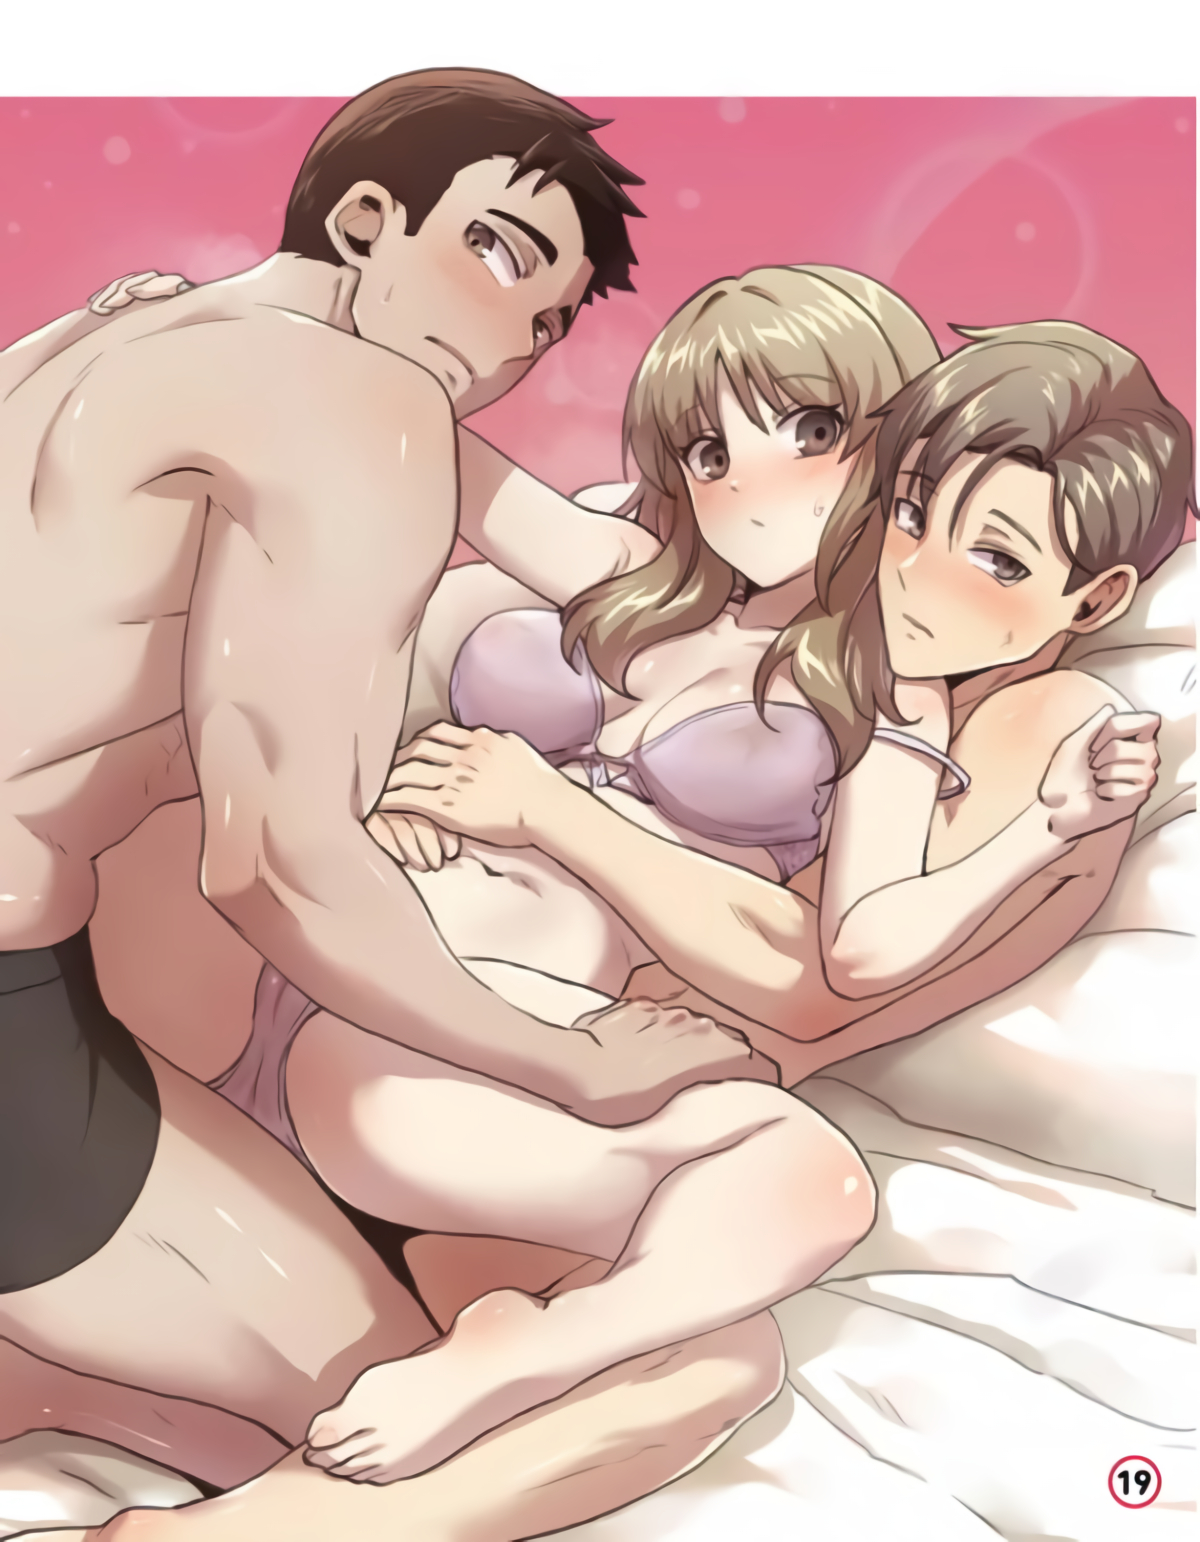 With My Brother’s Friends HOT ( Manhwa Porn ) thumbnail